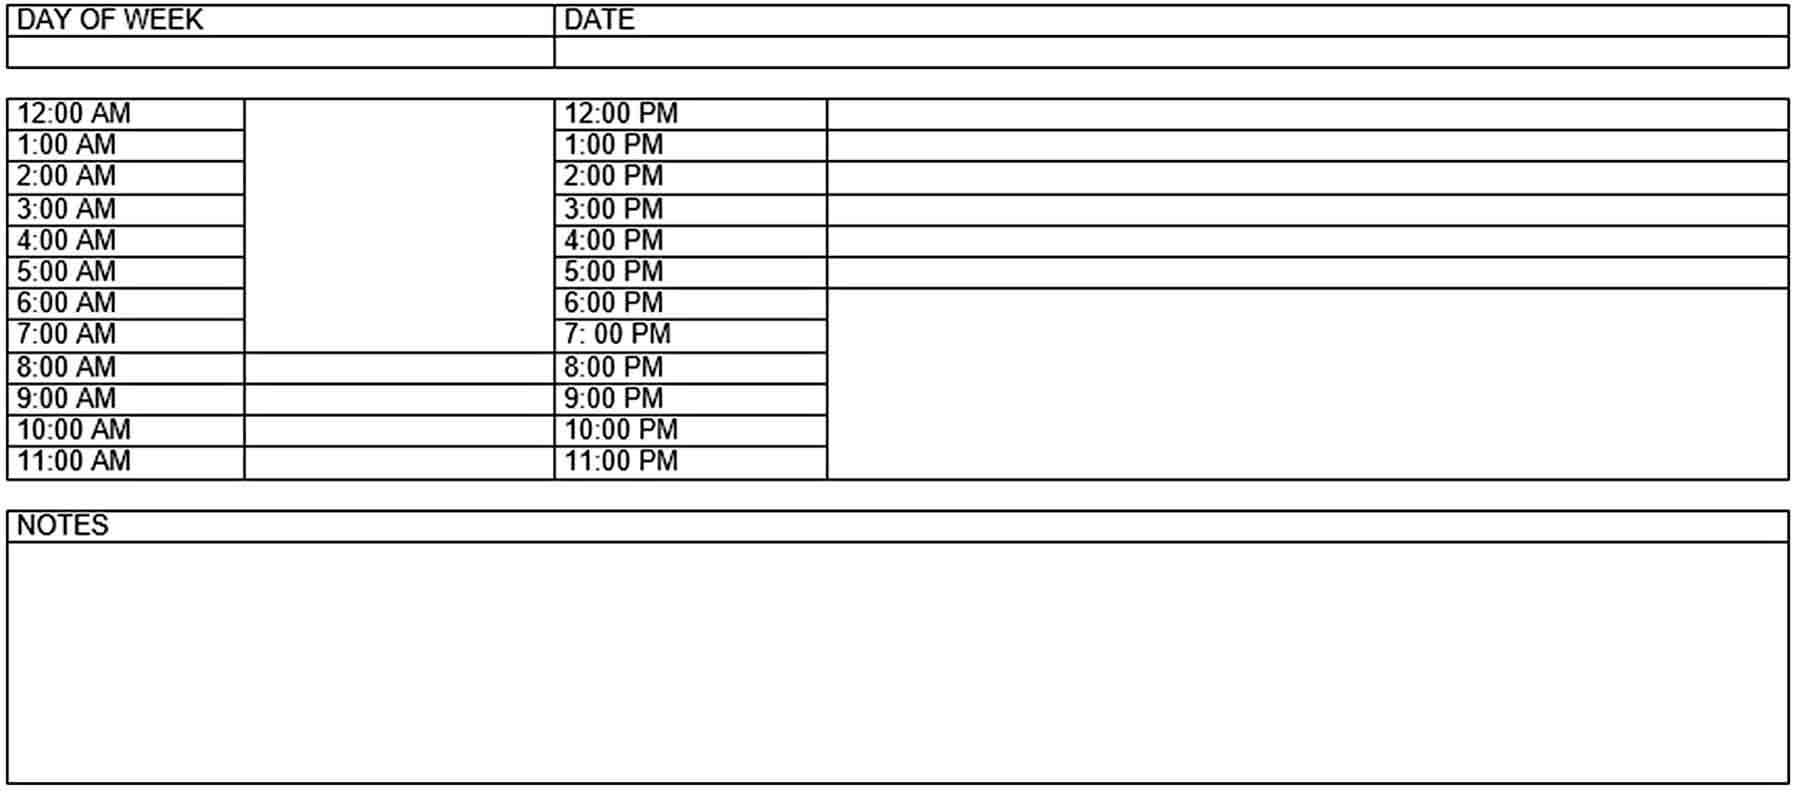 Daily Nurse Schedule Template Free Word Doc